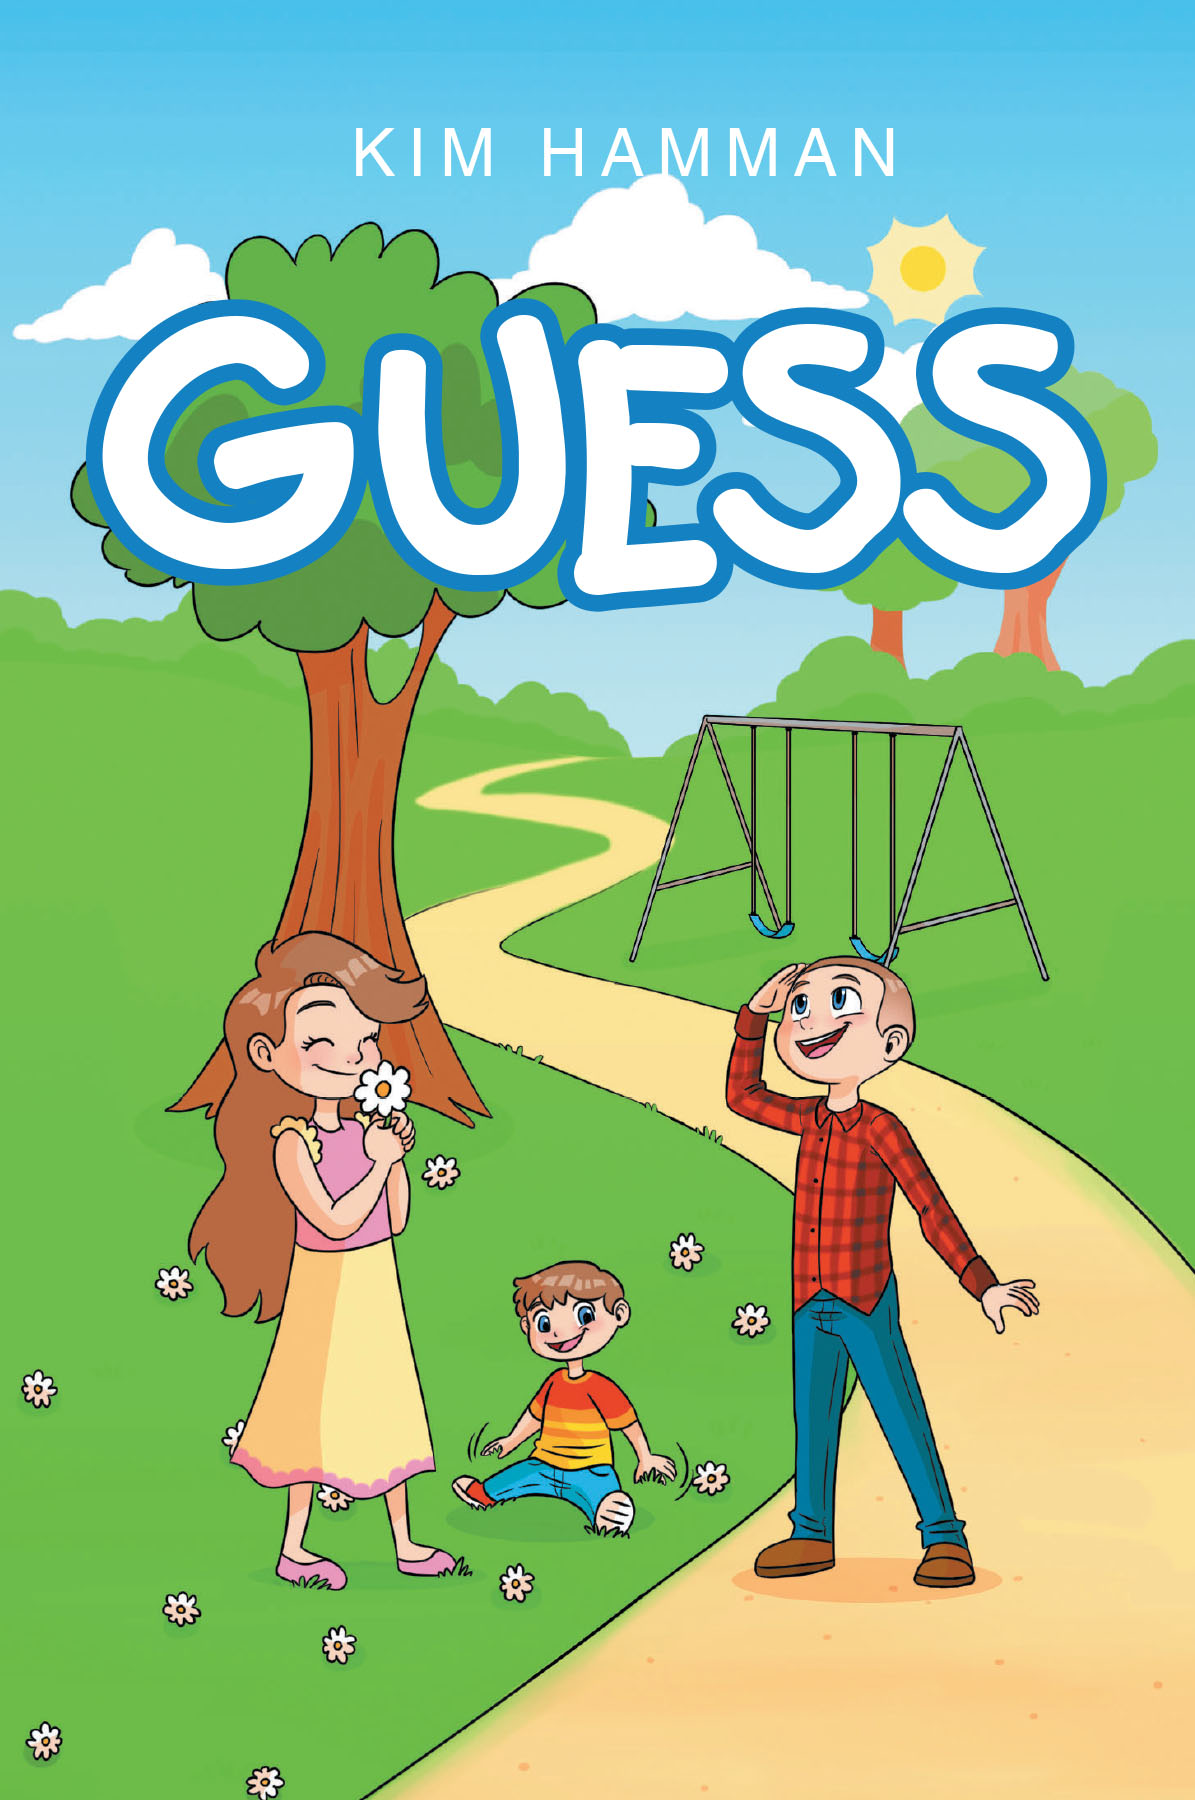 Author Kim Hamman’s New Book, "Guess," is a Charming Tale That Tests Young Readers to Identify Different Parts of Their Body Based on the Actions They Perform